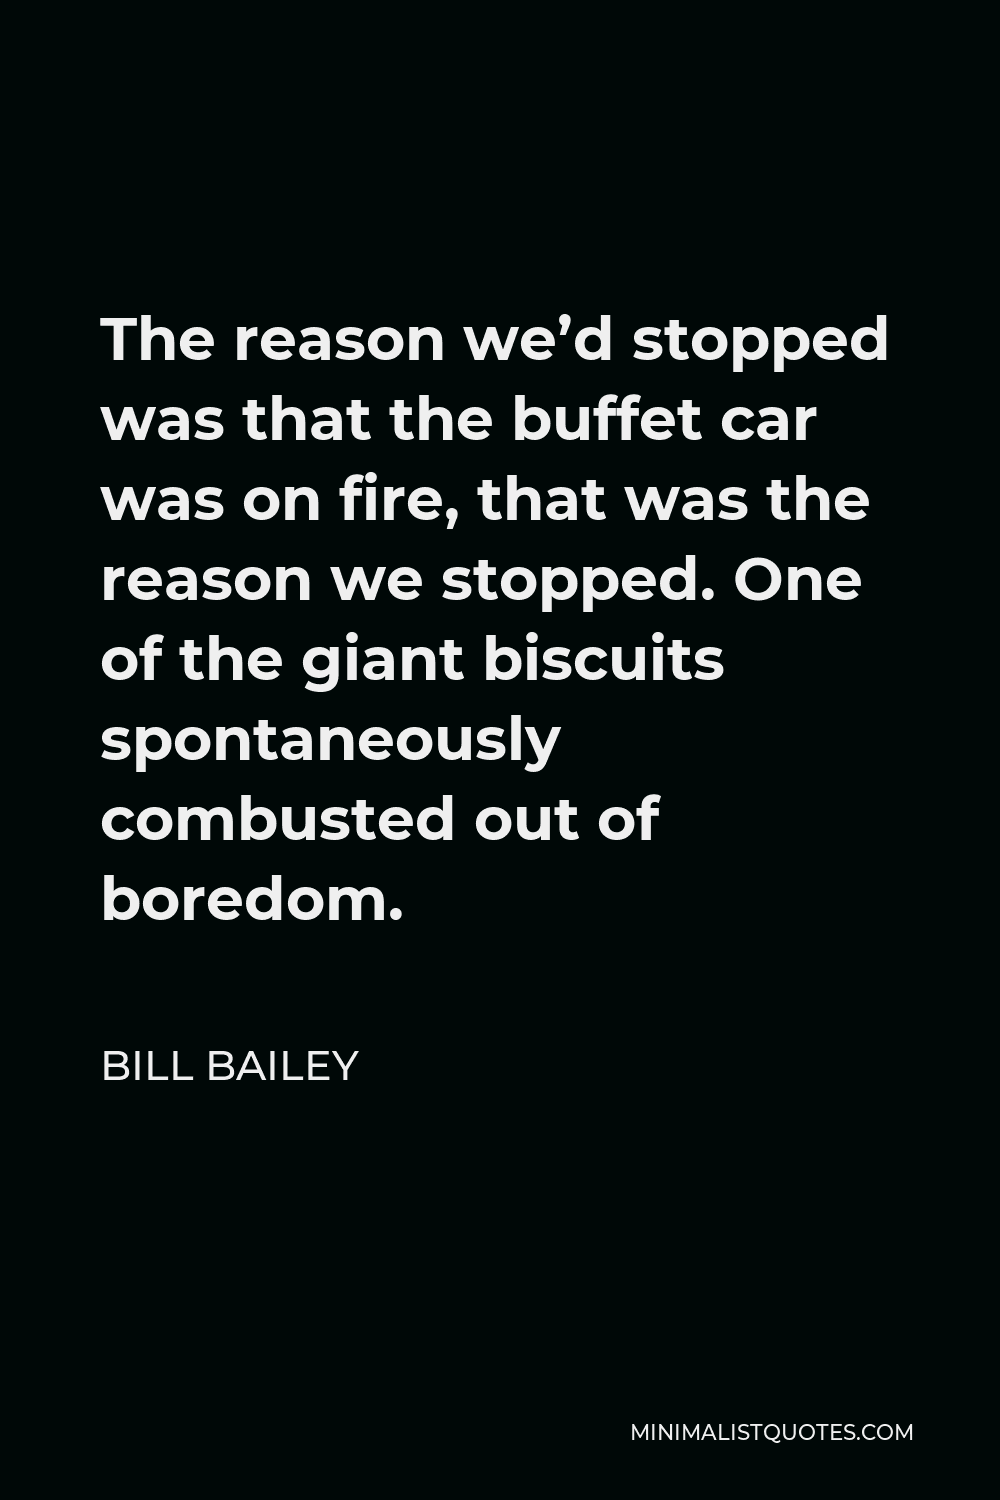 Bill Bailey Quote - The reason we’d stopped was that the buffet car was on fire, that was the reason we stopped. One of the giant biscuits spontaneously combusted out of boredom.